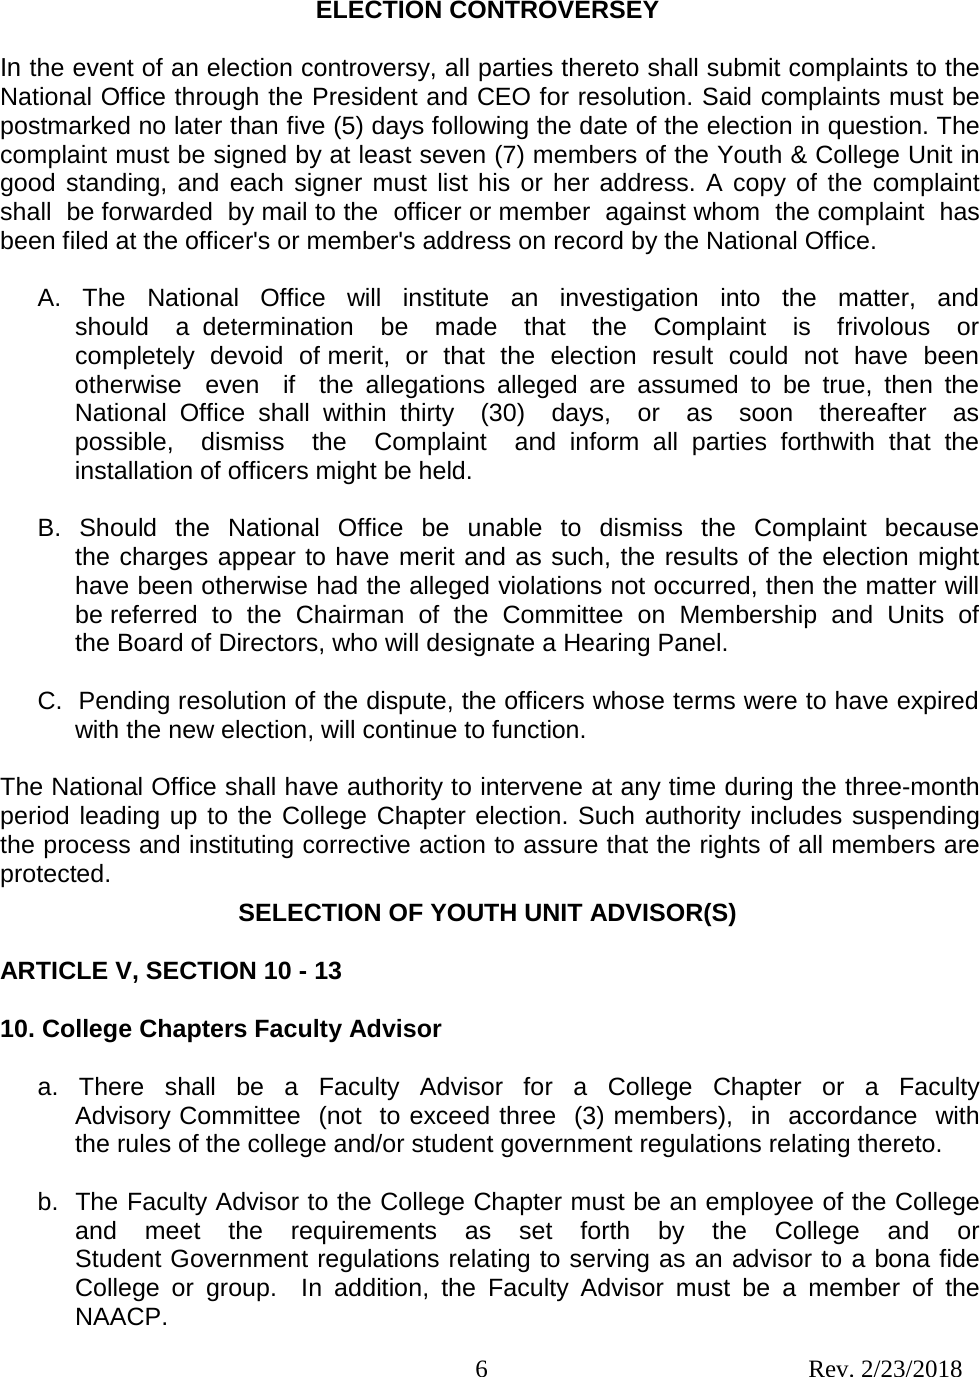 Page 6 of 10 - 2018 Youth And College Elections Procedure Manual